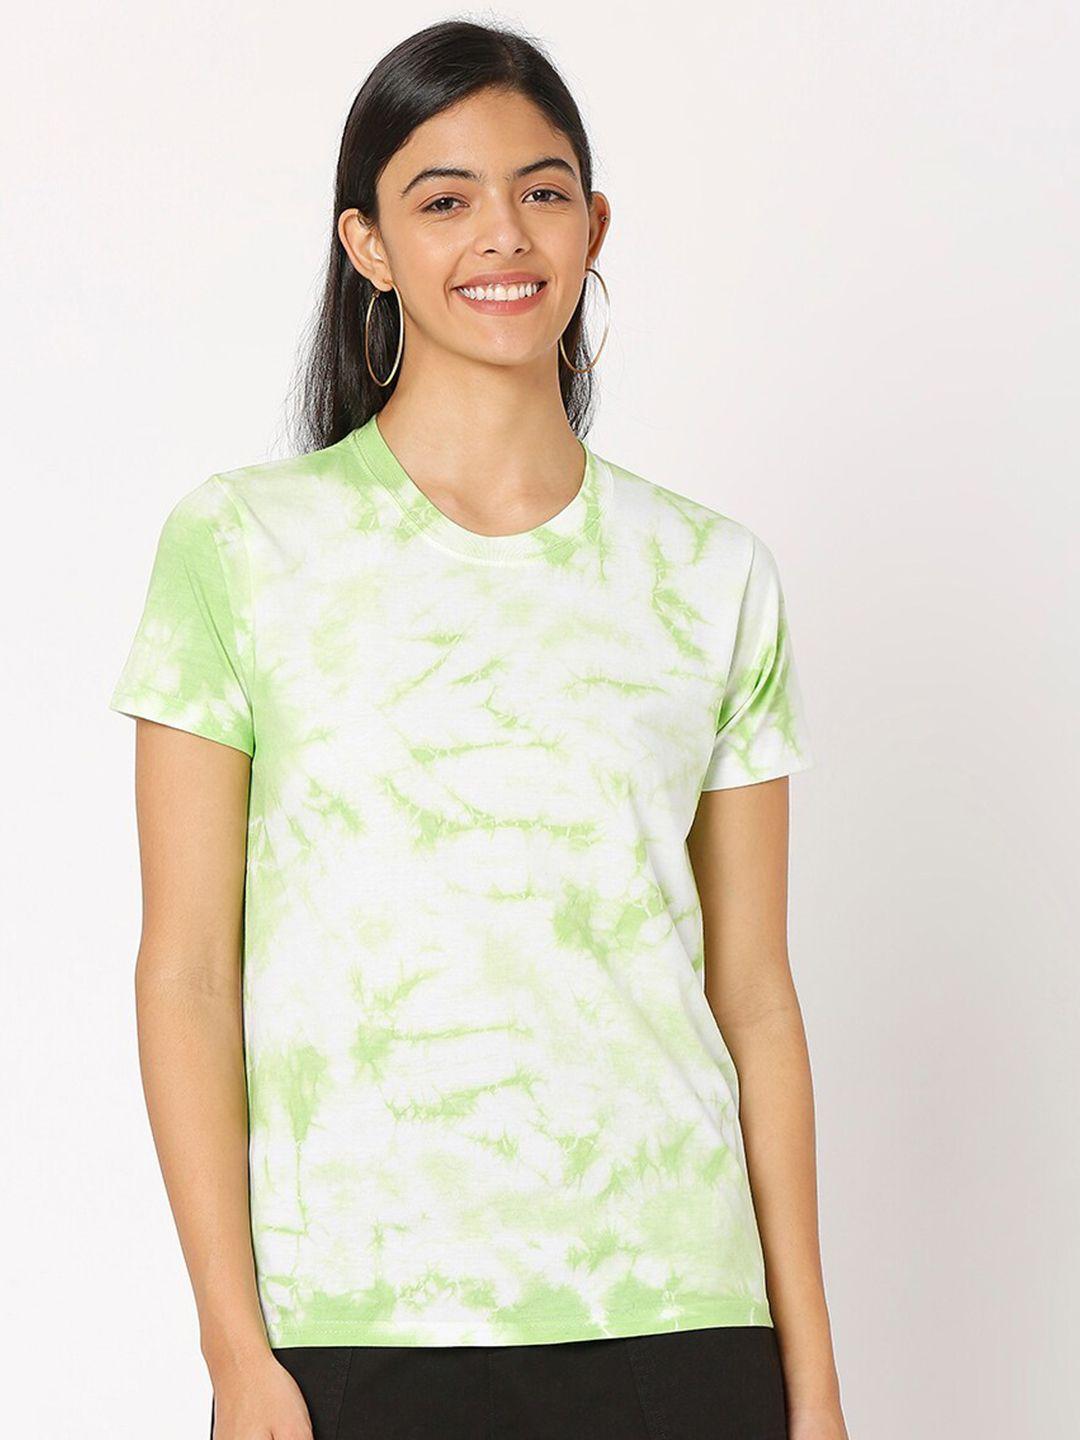 smarty pants women lime green & white tie and dye dyed t-shirt